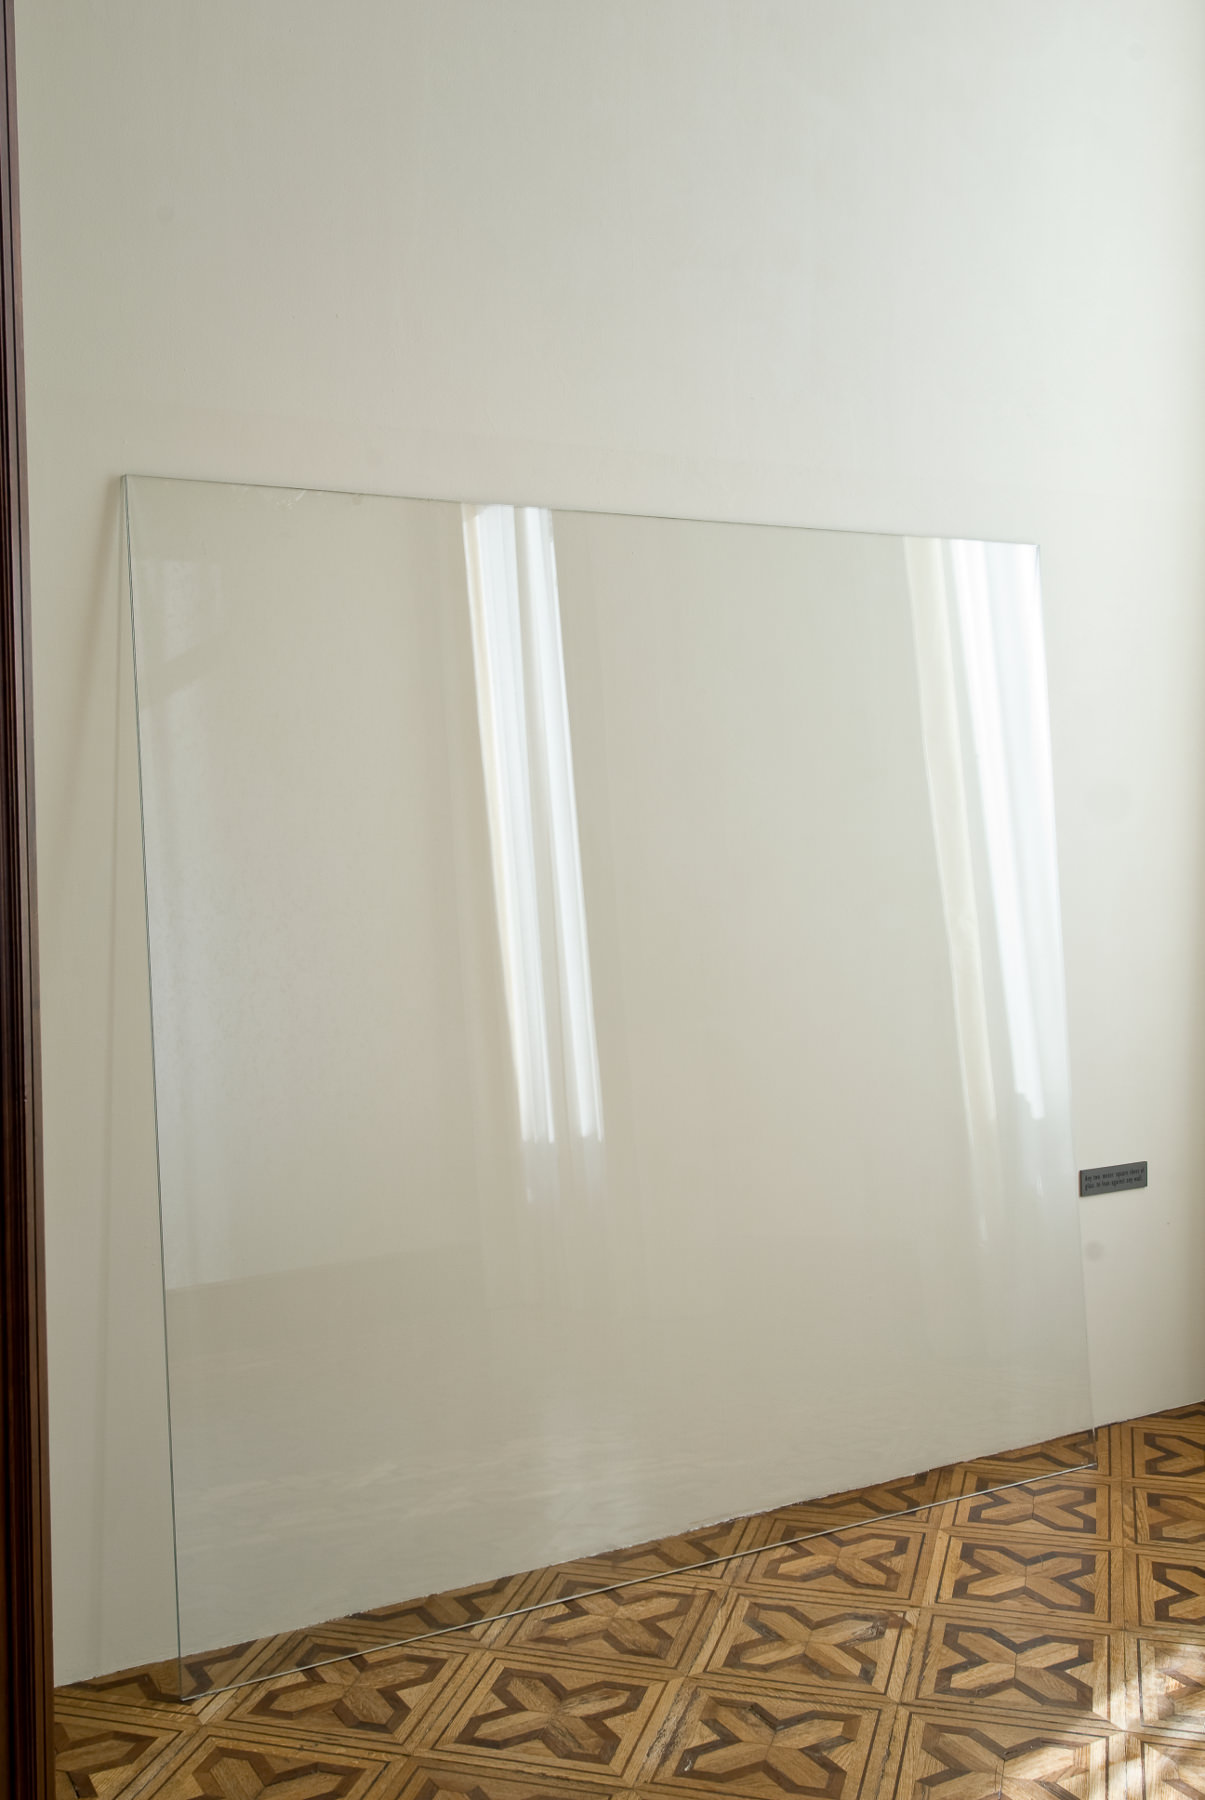 Joseph Kosuth - Any two Meter Square Sheet of Glass to Lean Against any Wall